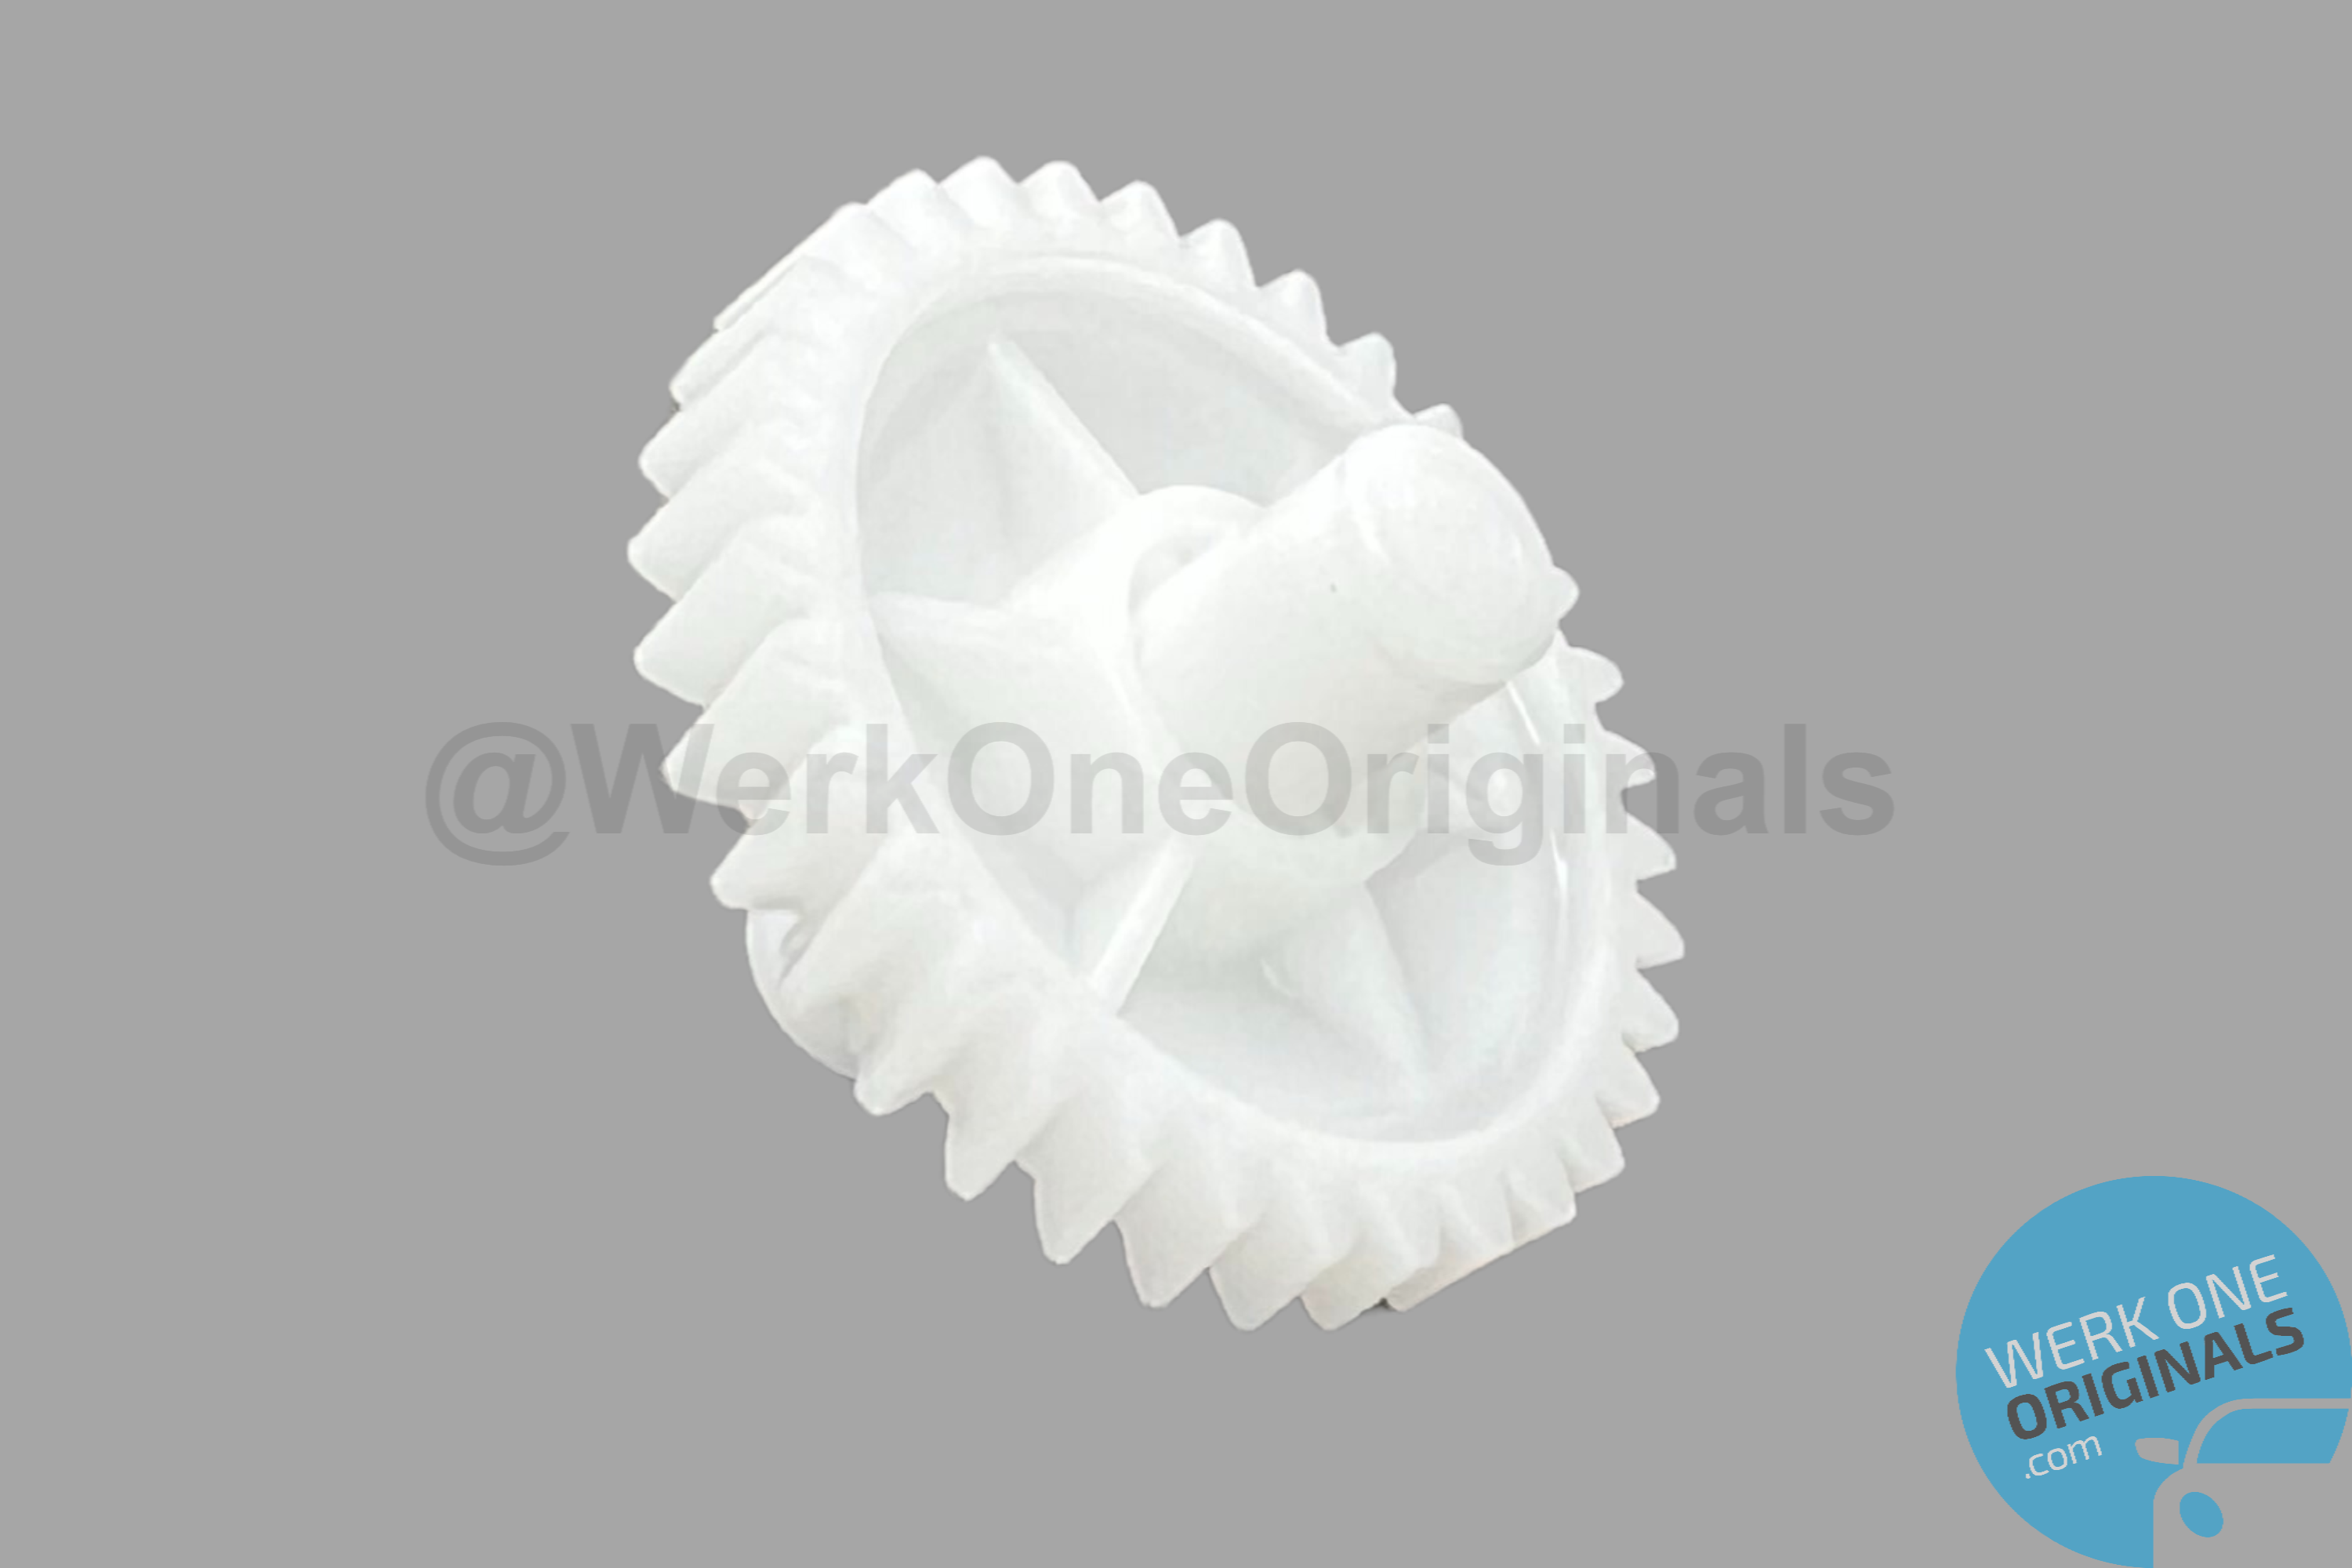 Porsche Genuine Replacement Sunroof Drive Gear for 968 Models